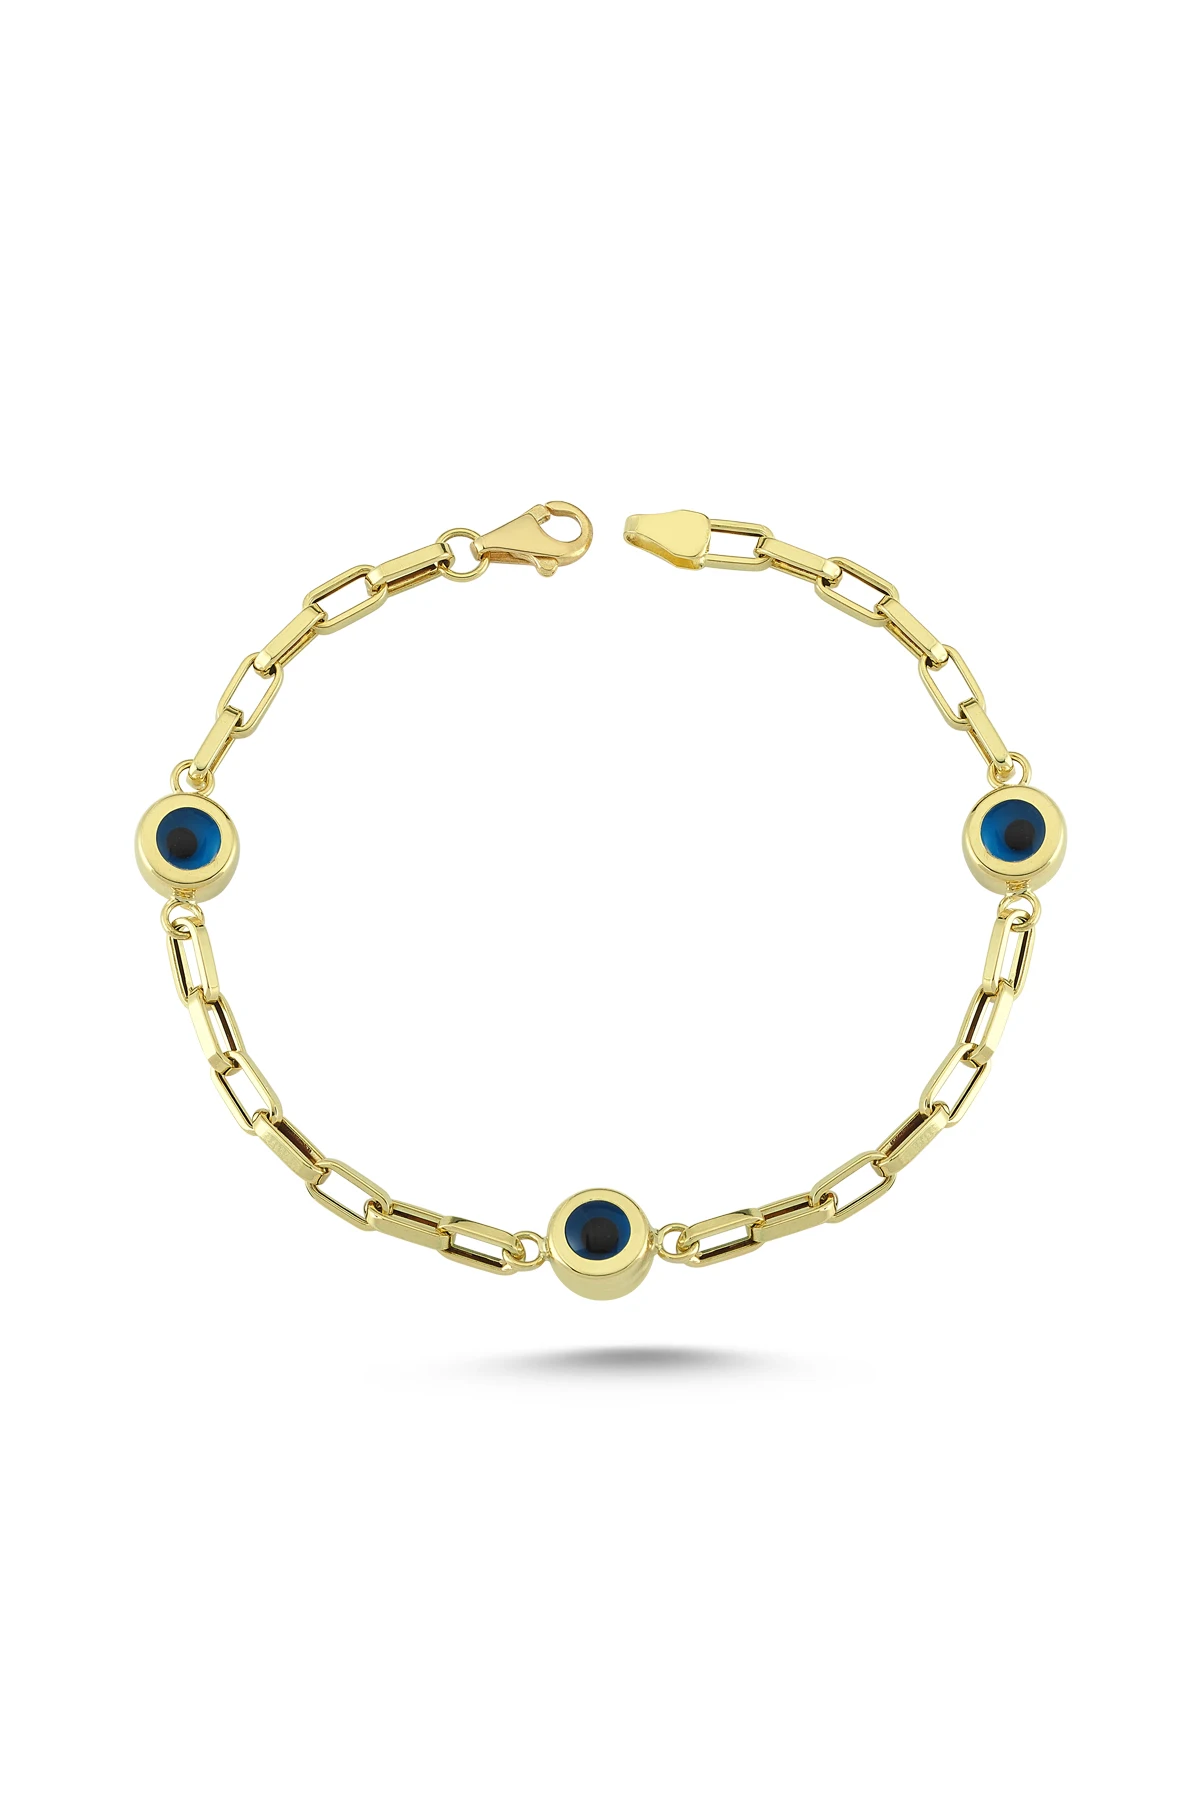 

Triple Evil Eye Beaded Gold Bracelet TTGBLANZ109 - Certified 14K Gold–A perfect gift for your Loved Ones